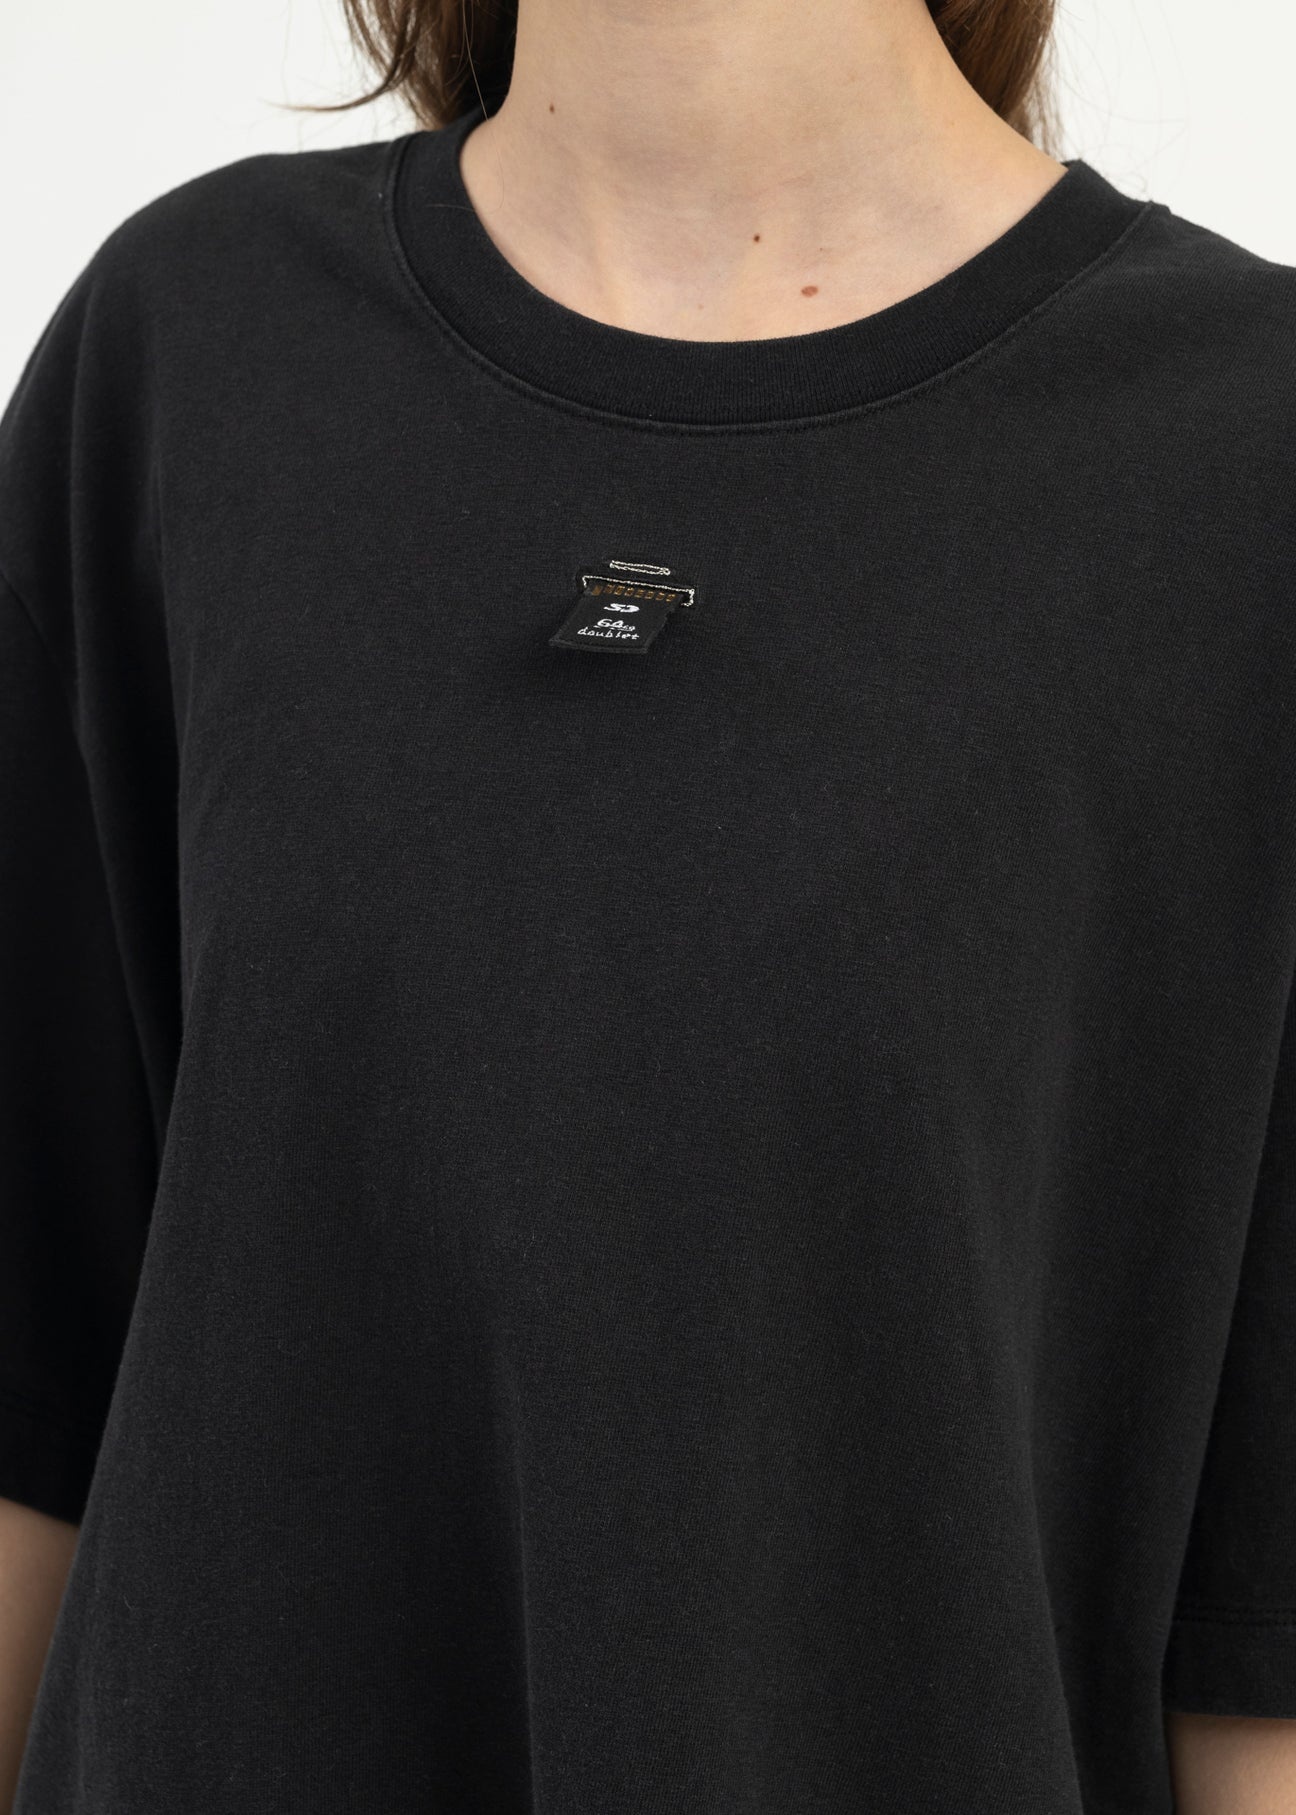 BLACK SD CARD EMBROIDERY T-SHIRT - 2